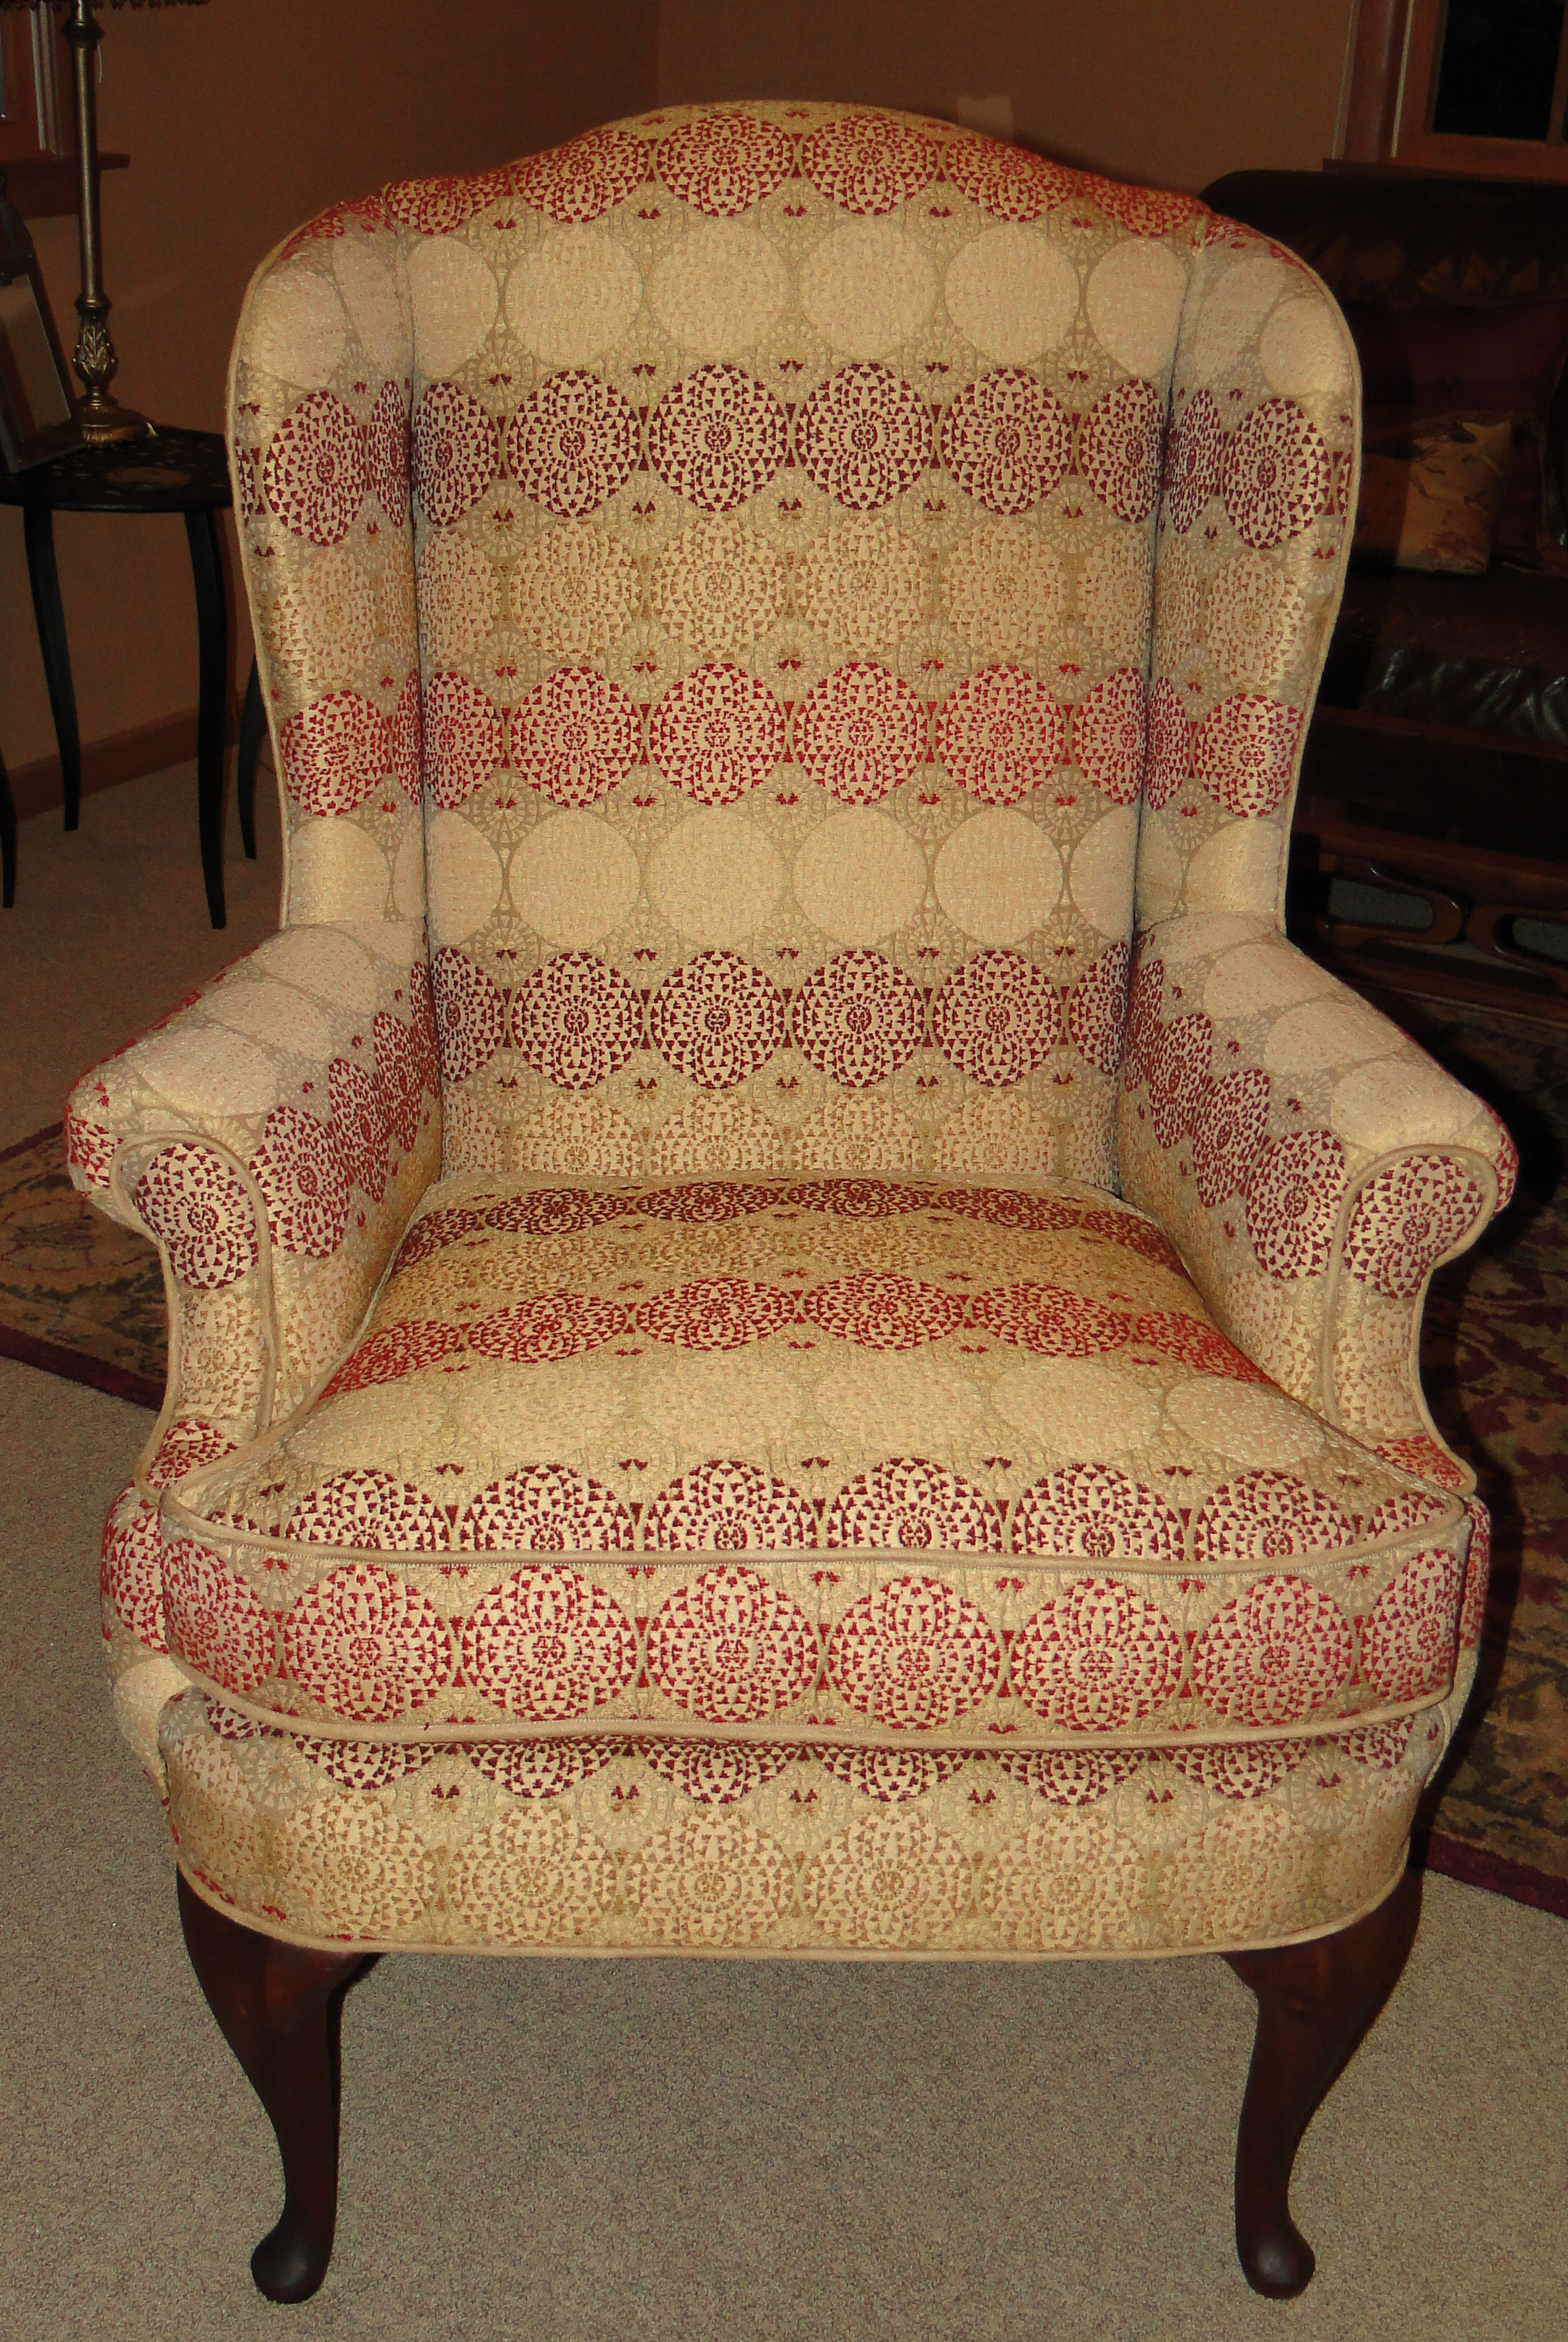 Front view of complete chair